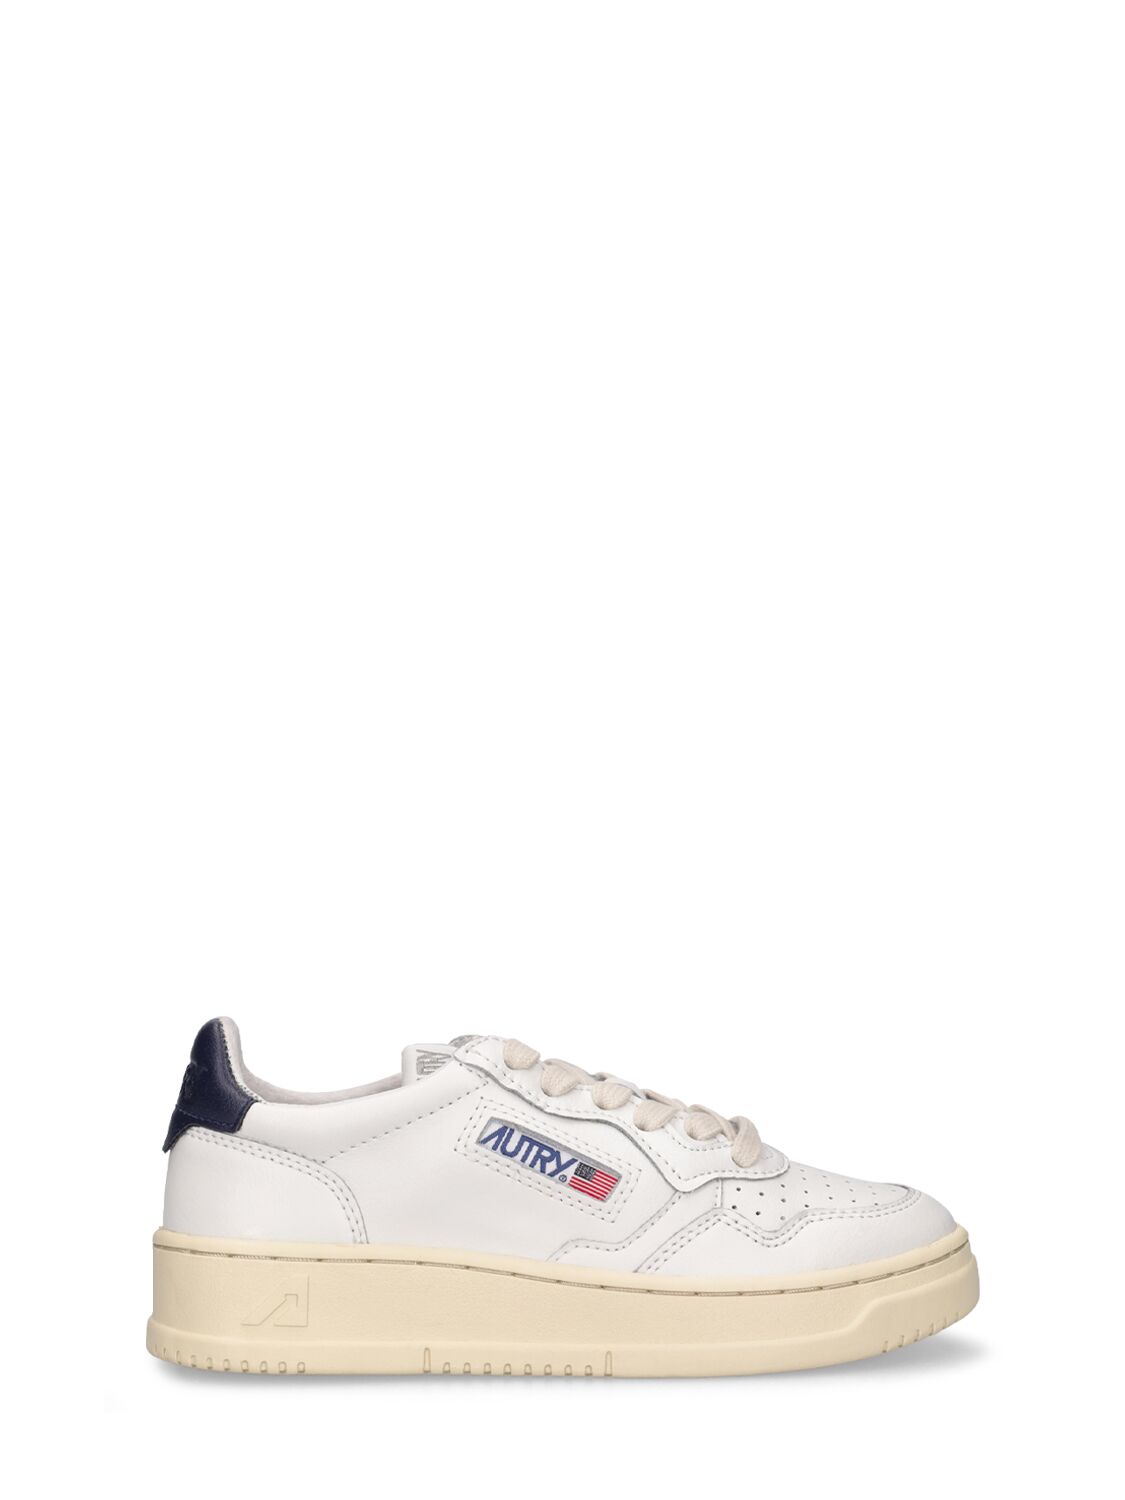 AUTRY MEDALIST LOW LACE-UP trainers